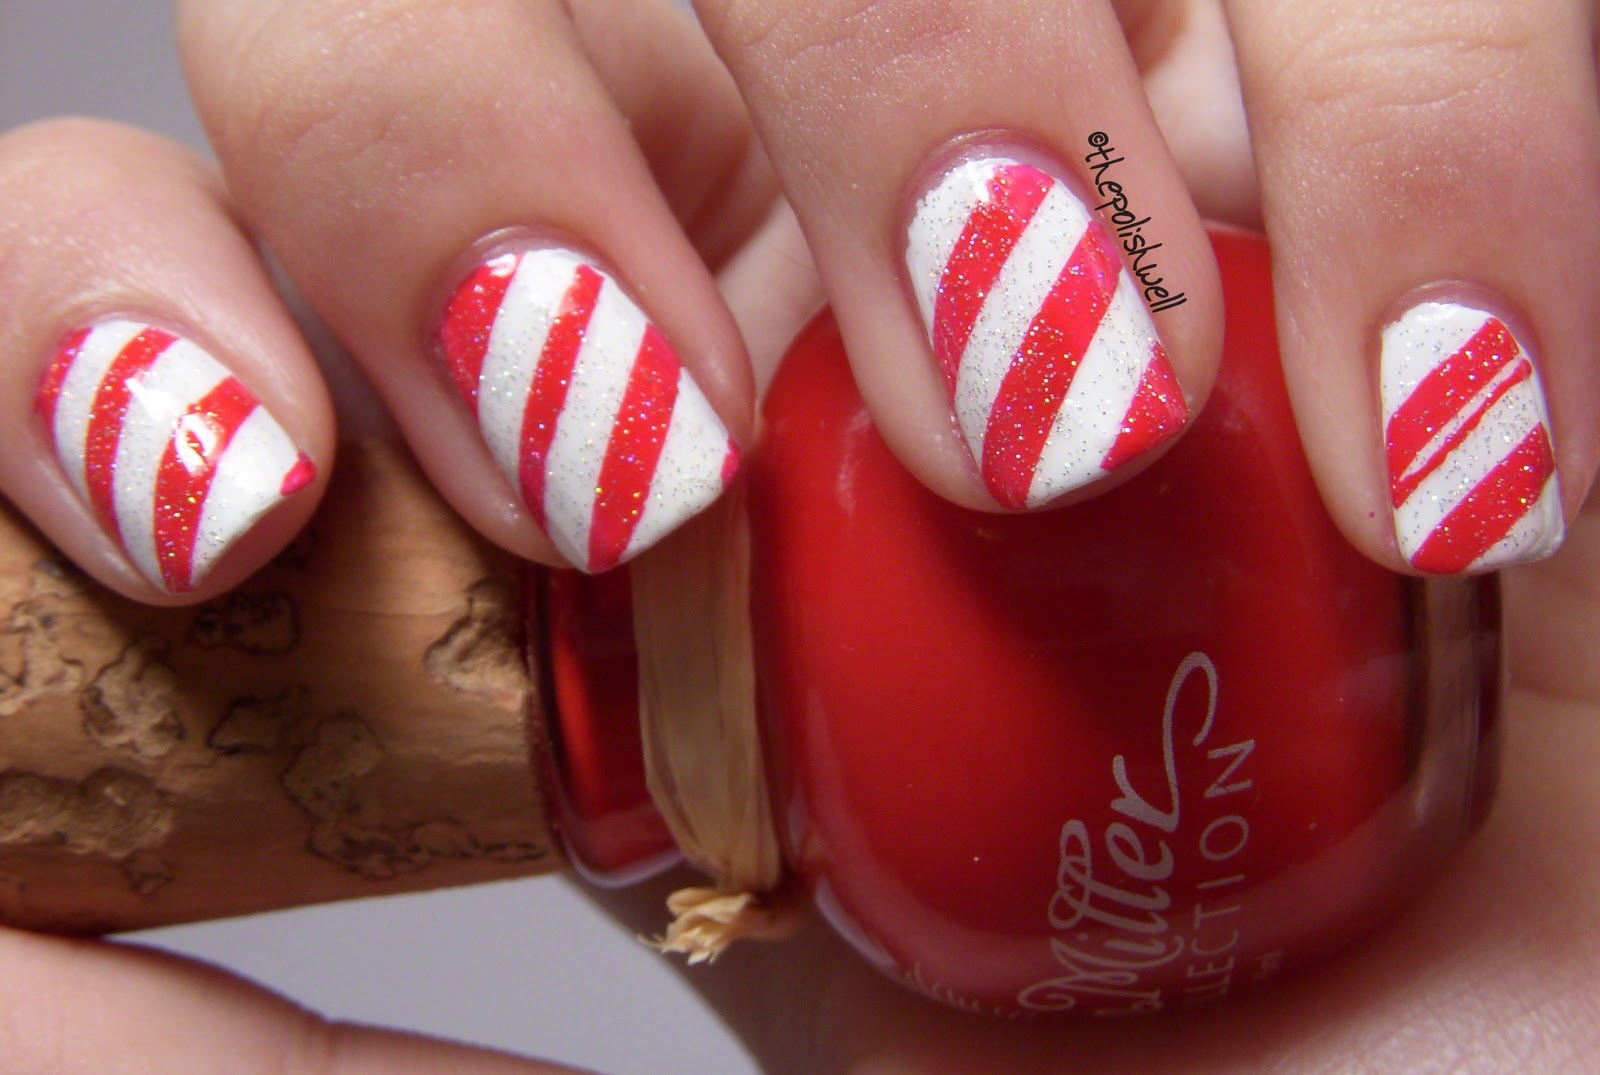 2. "Candy Cane" Nail Art - wide 5